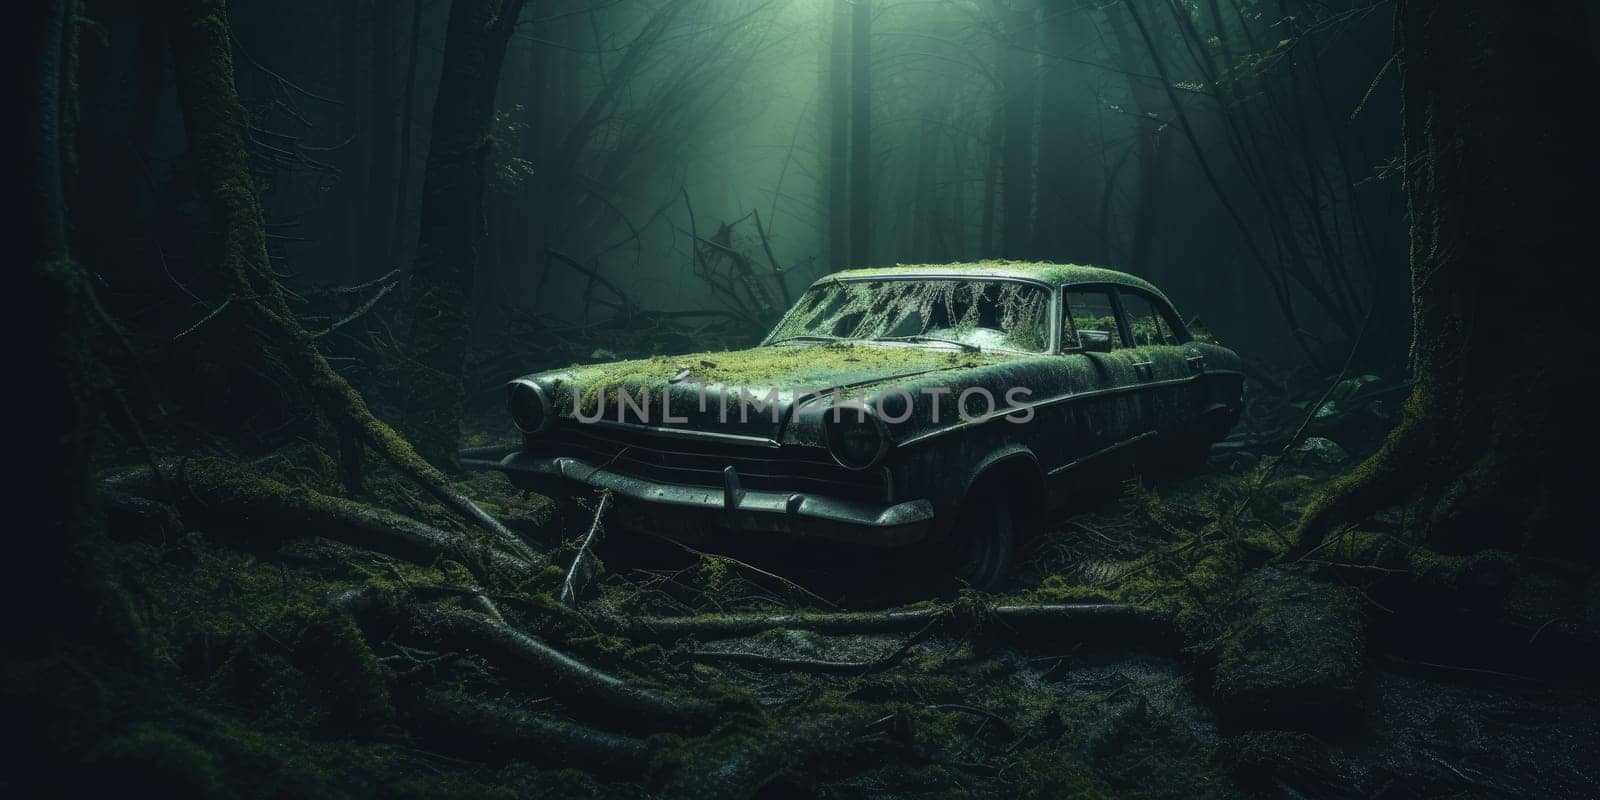 Abondoned car in the dark mystic forest by Kadula